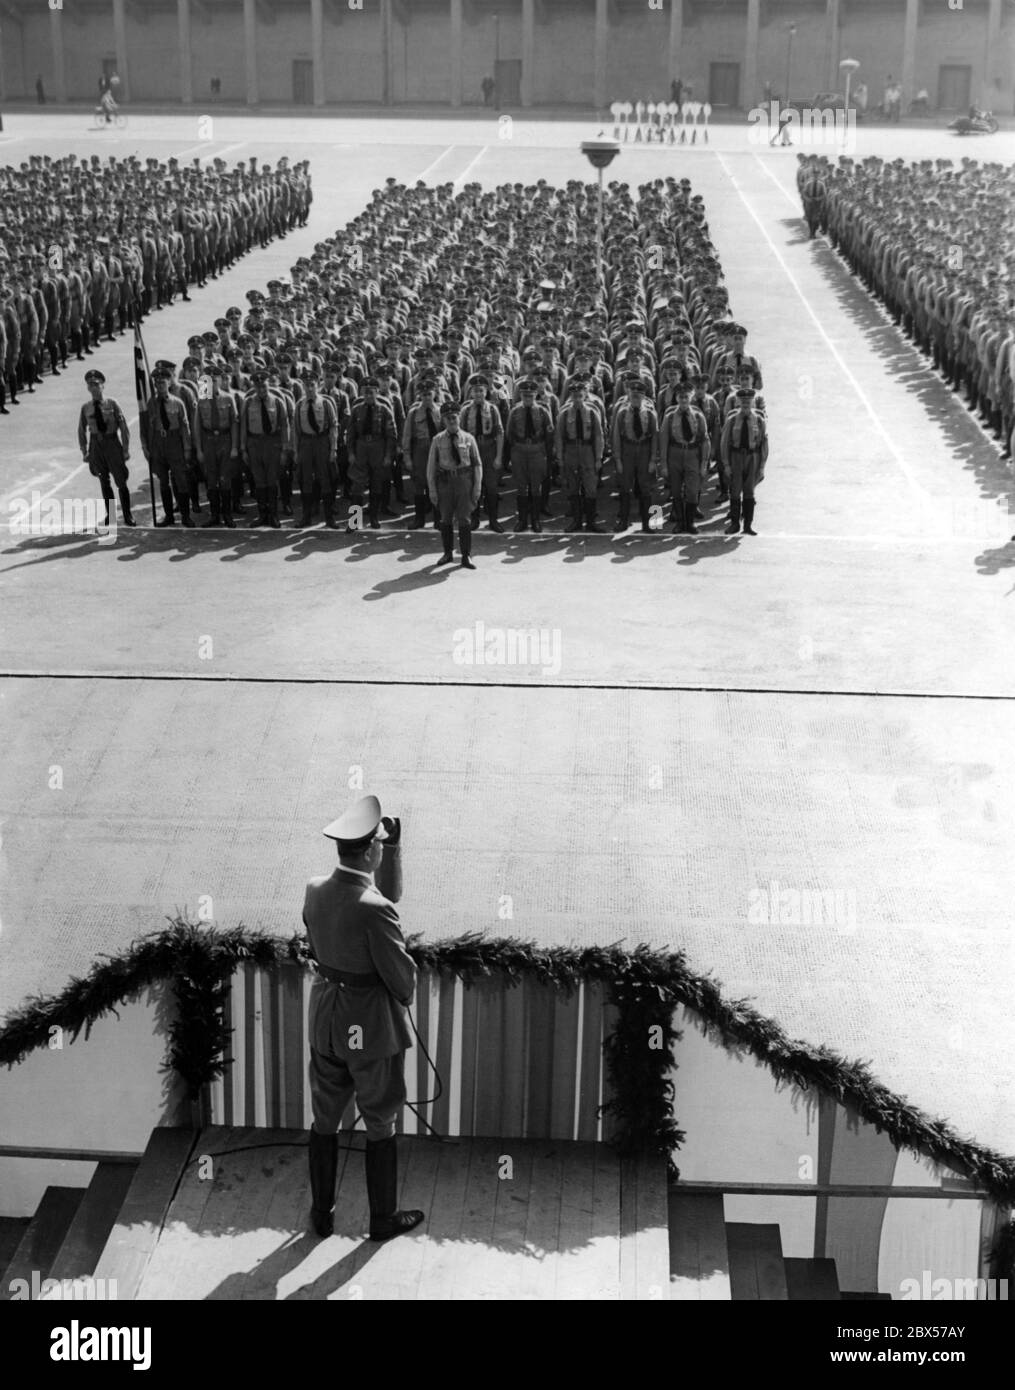 Artur Goerlitzer, deputy Gauleiter, gives a speech to the Nuernbergfahrer (10,000 political leaders of the Gau Berlin who will participate in the Nuremberg Rally) gathered in front of the Deutschlandhalle in Berlin. Stock Photo